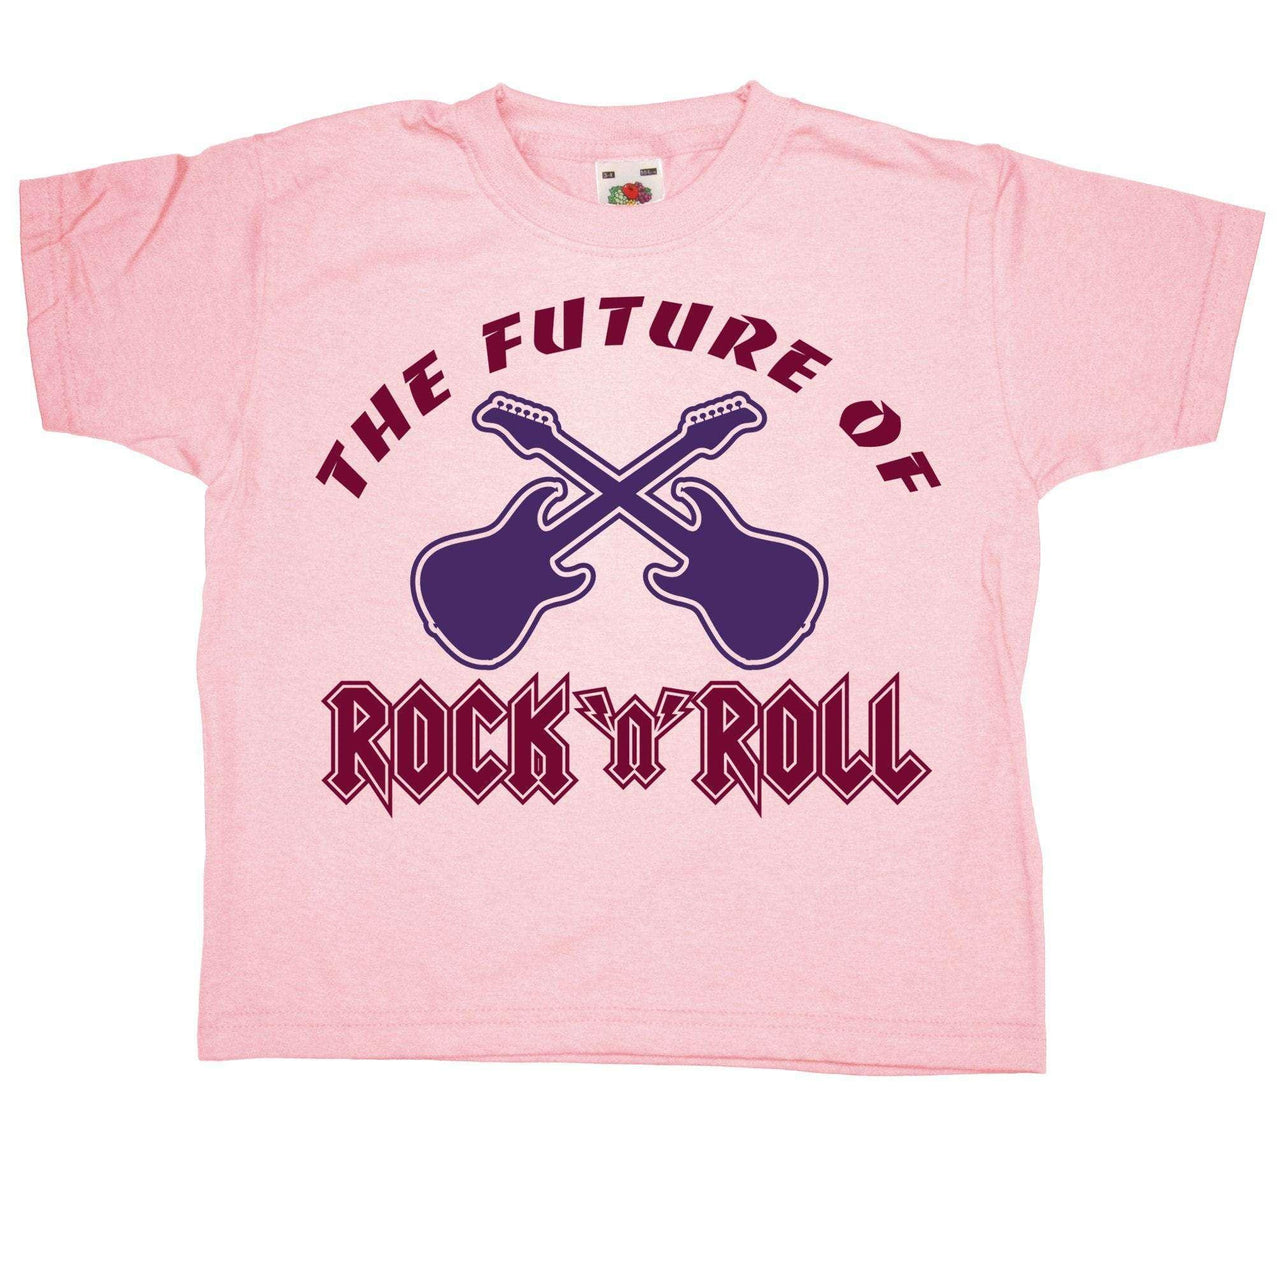 The Future Of Rock N Roll Childrens T-Shirt 8Ball